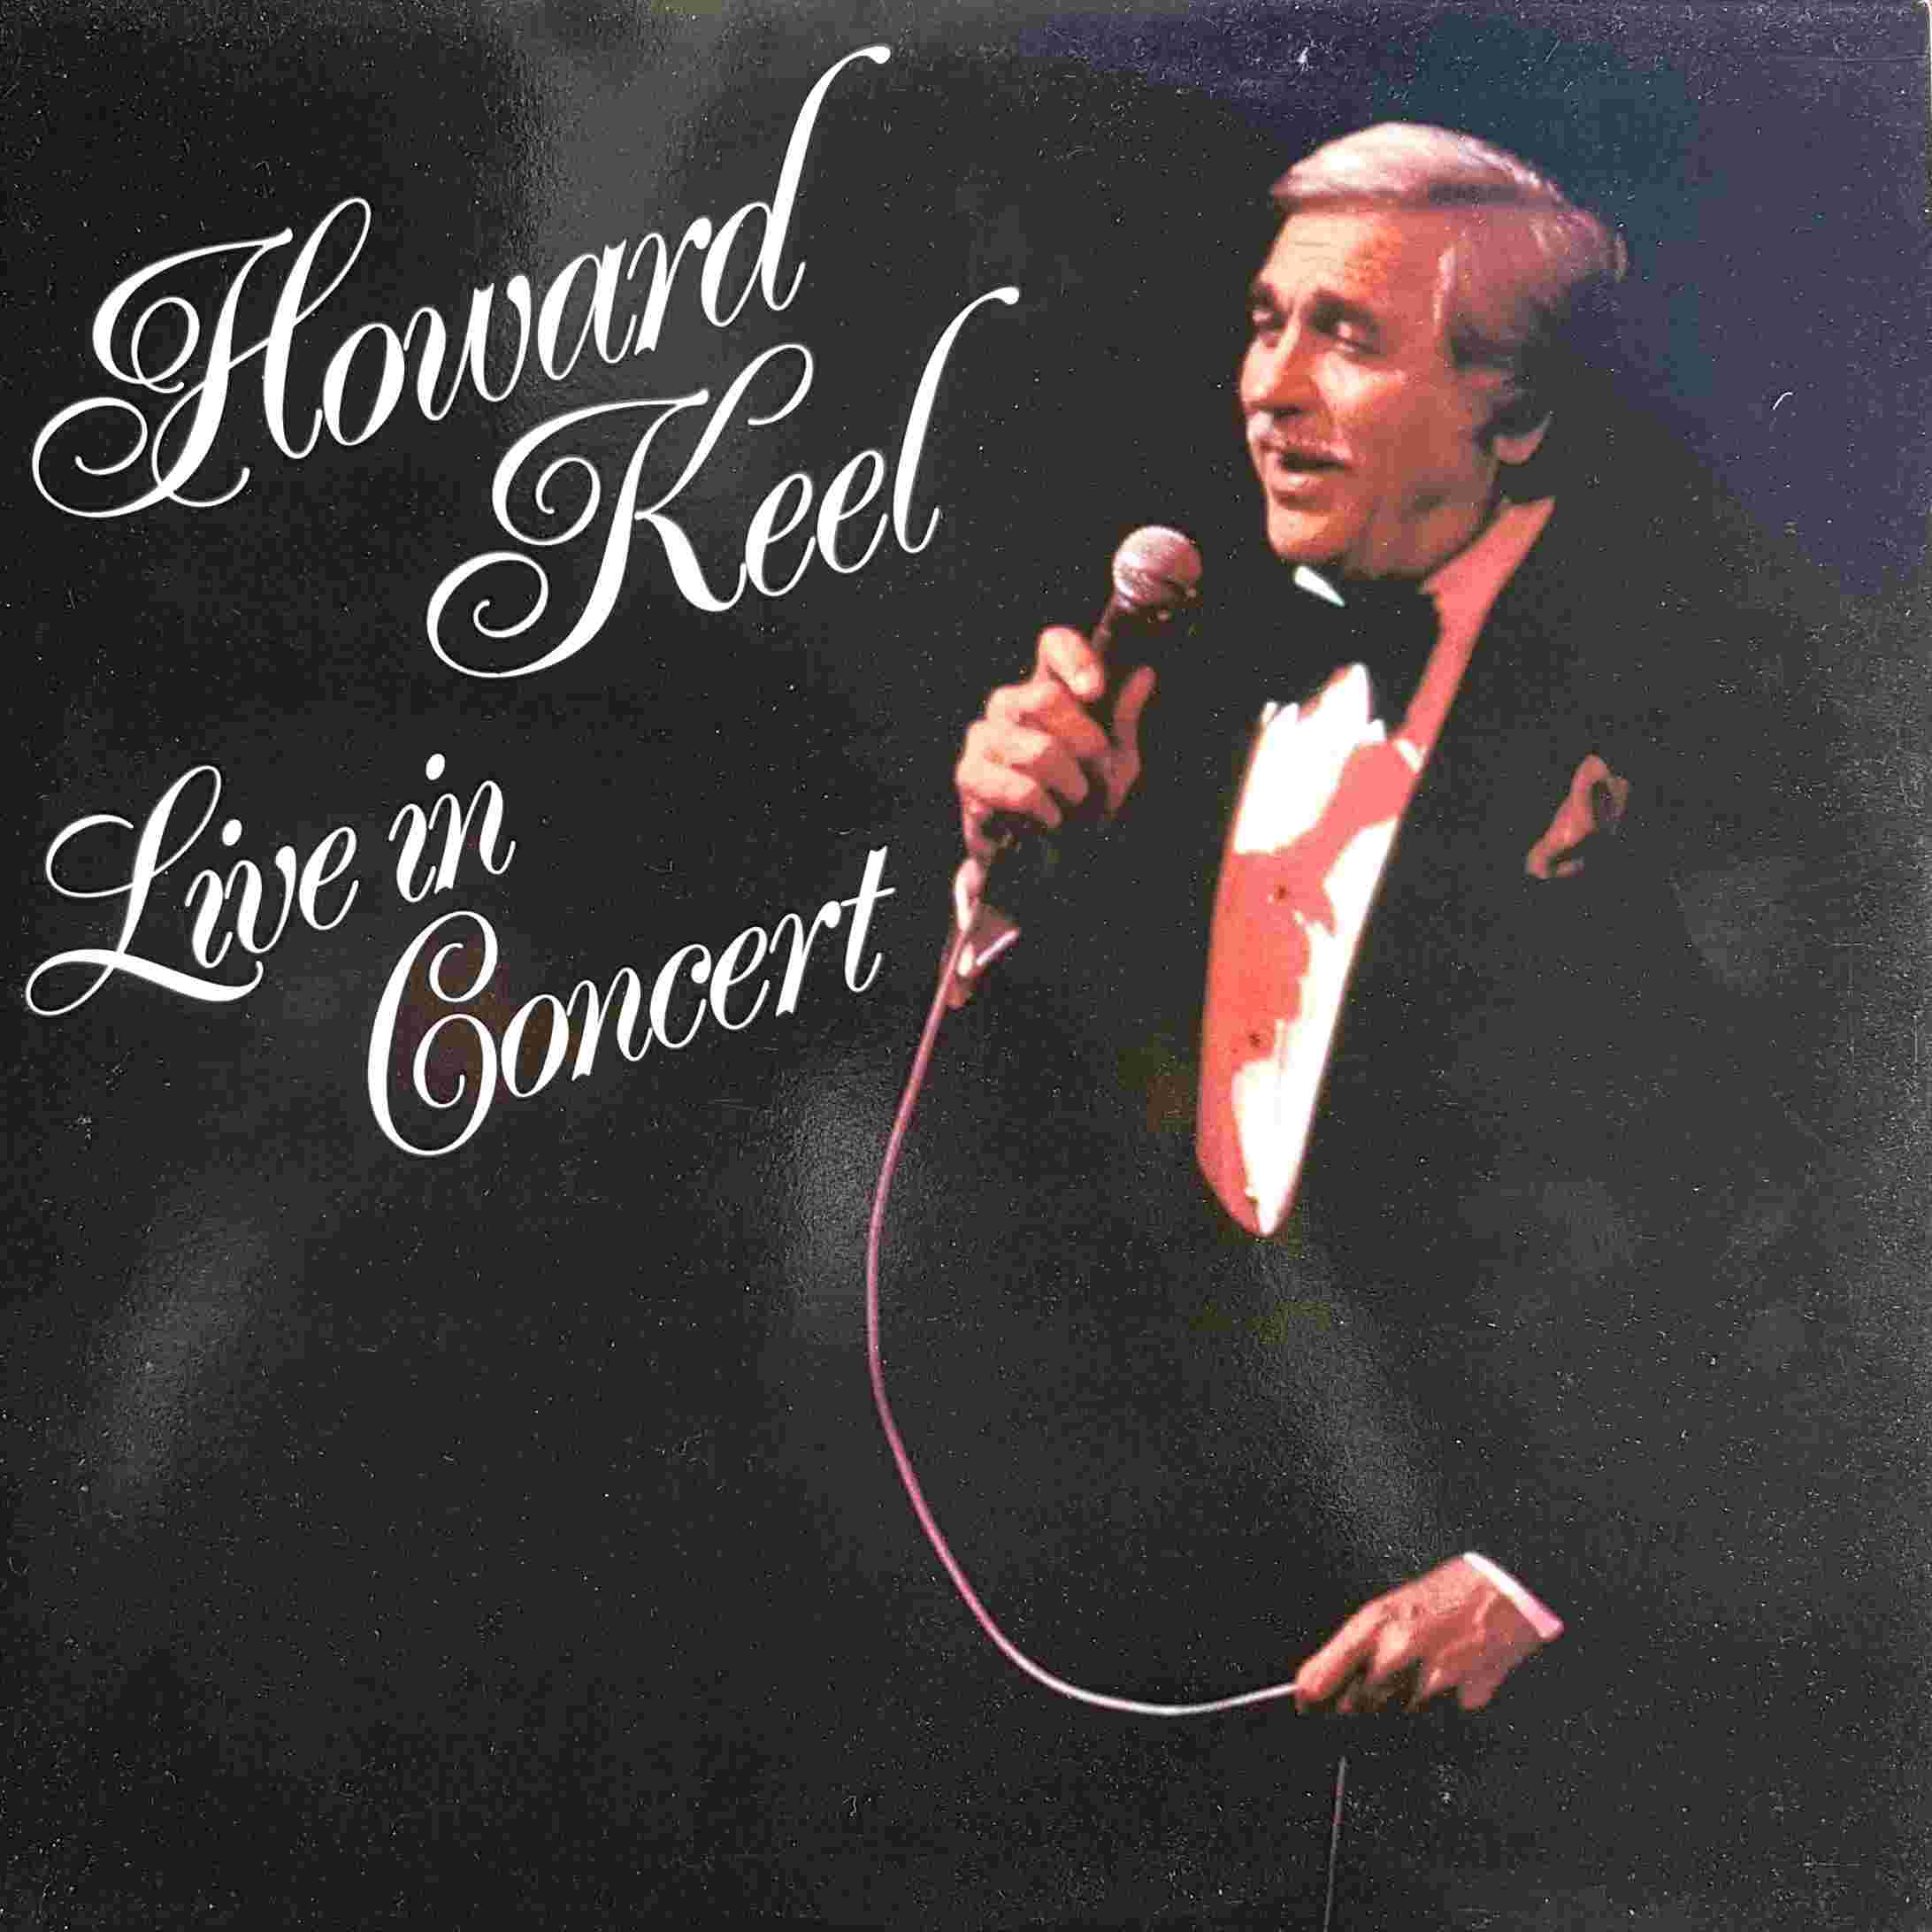 Picture of REQ 744 Howard Keel - live in concert by artist Howard Keel